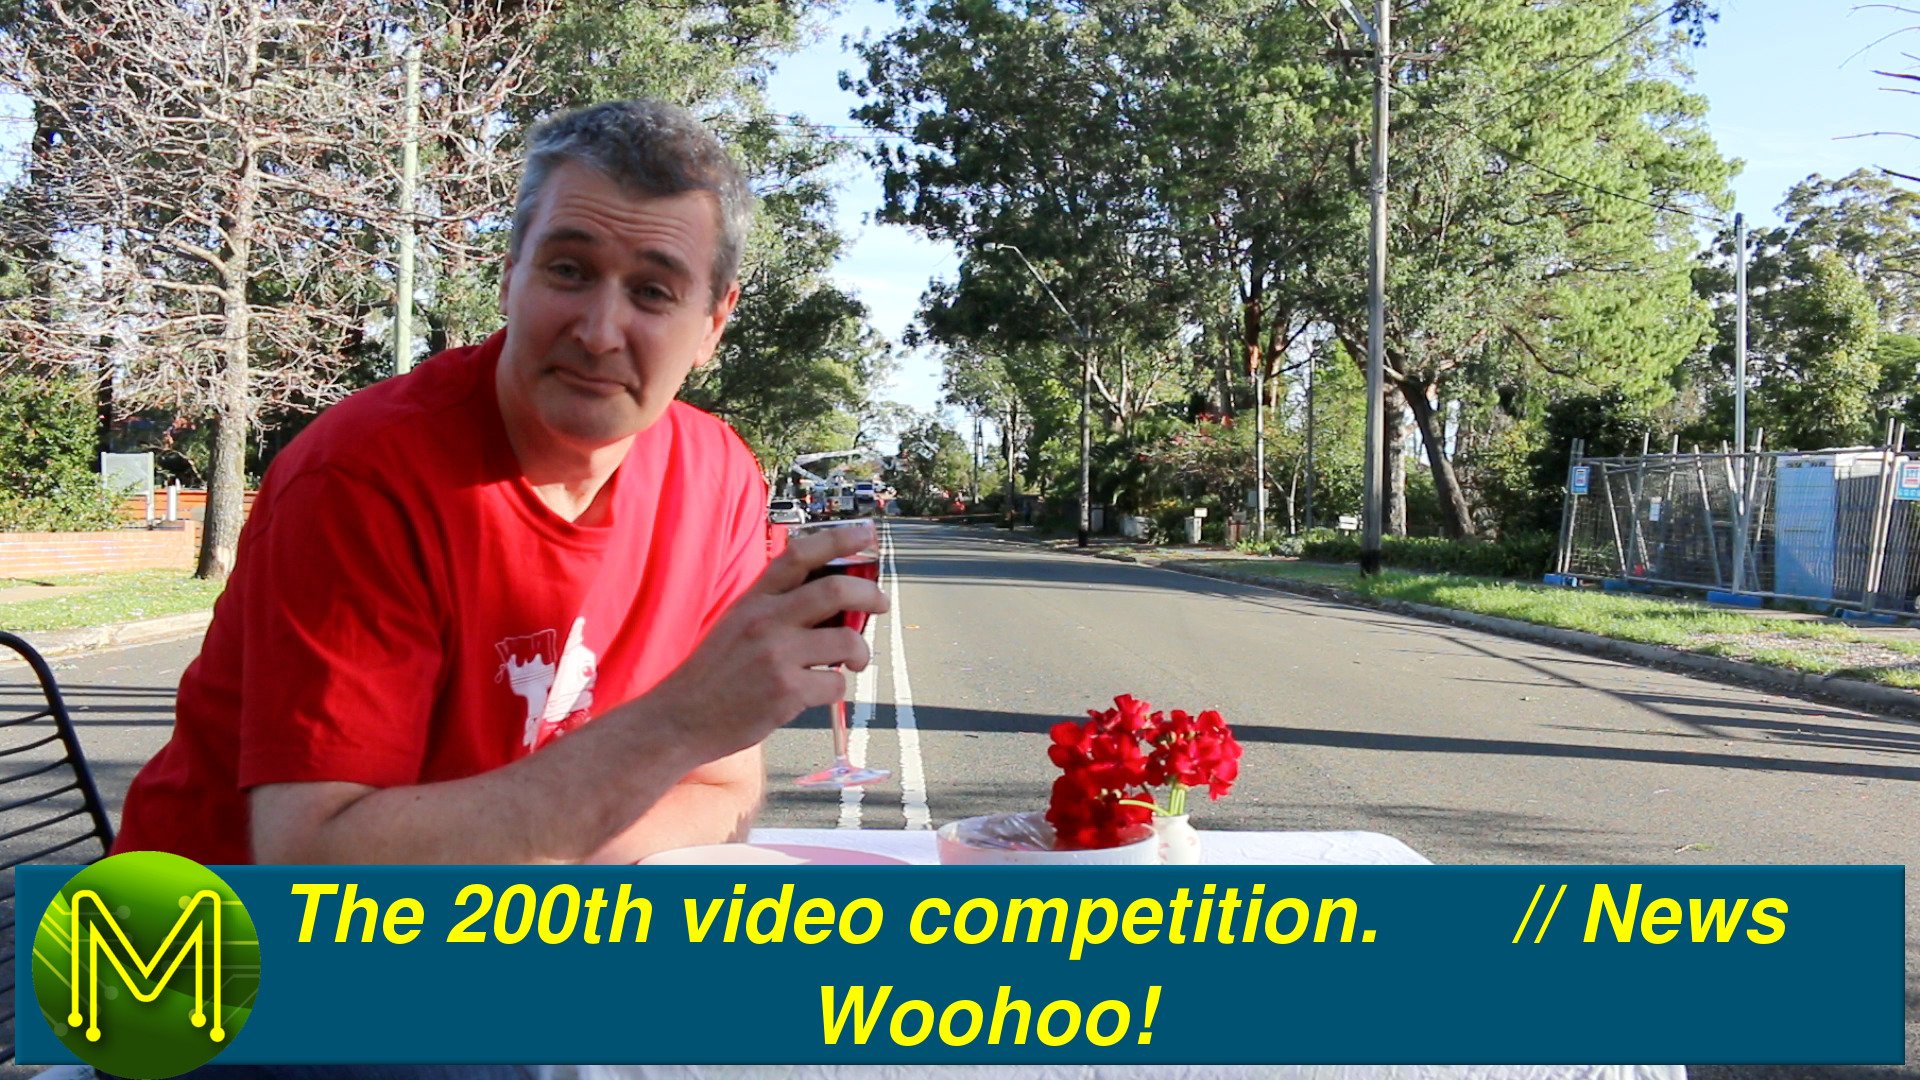 The 200th video competition. Woohoo!